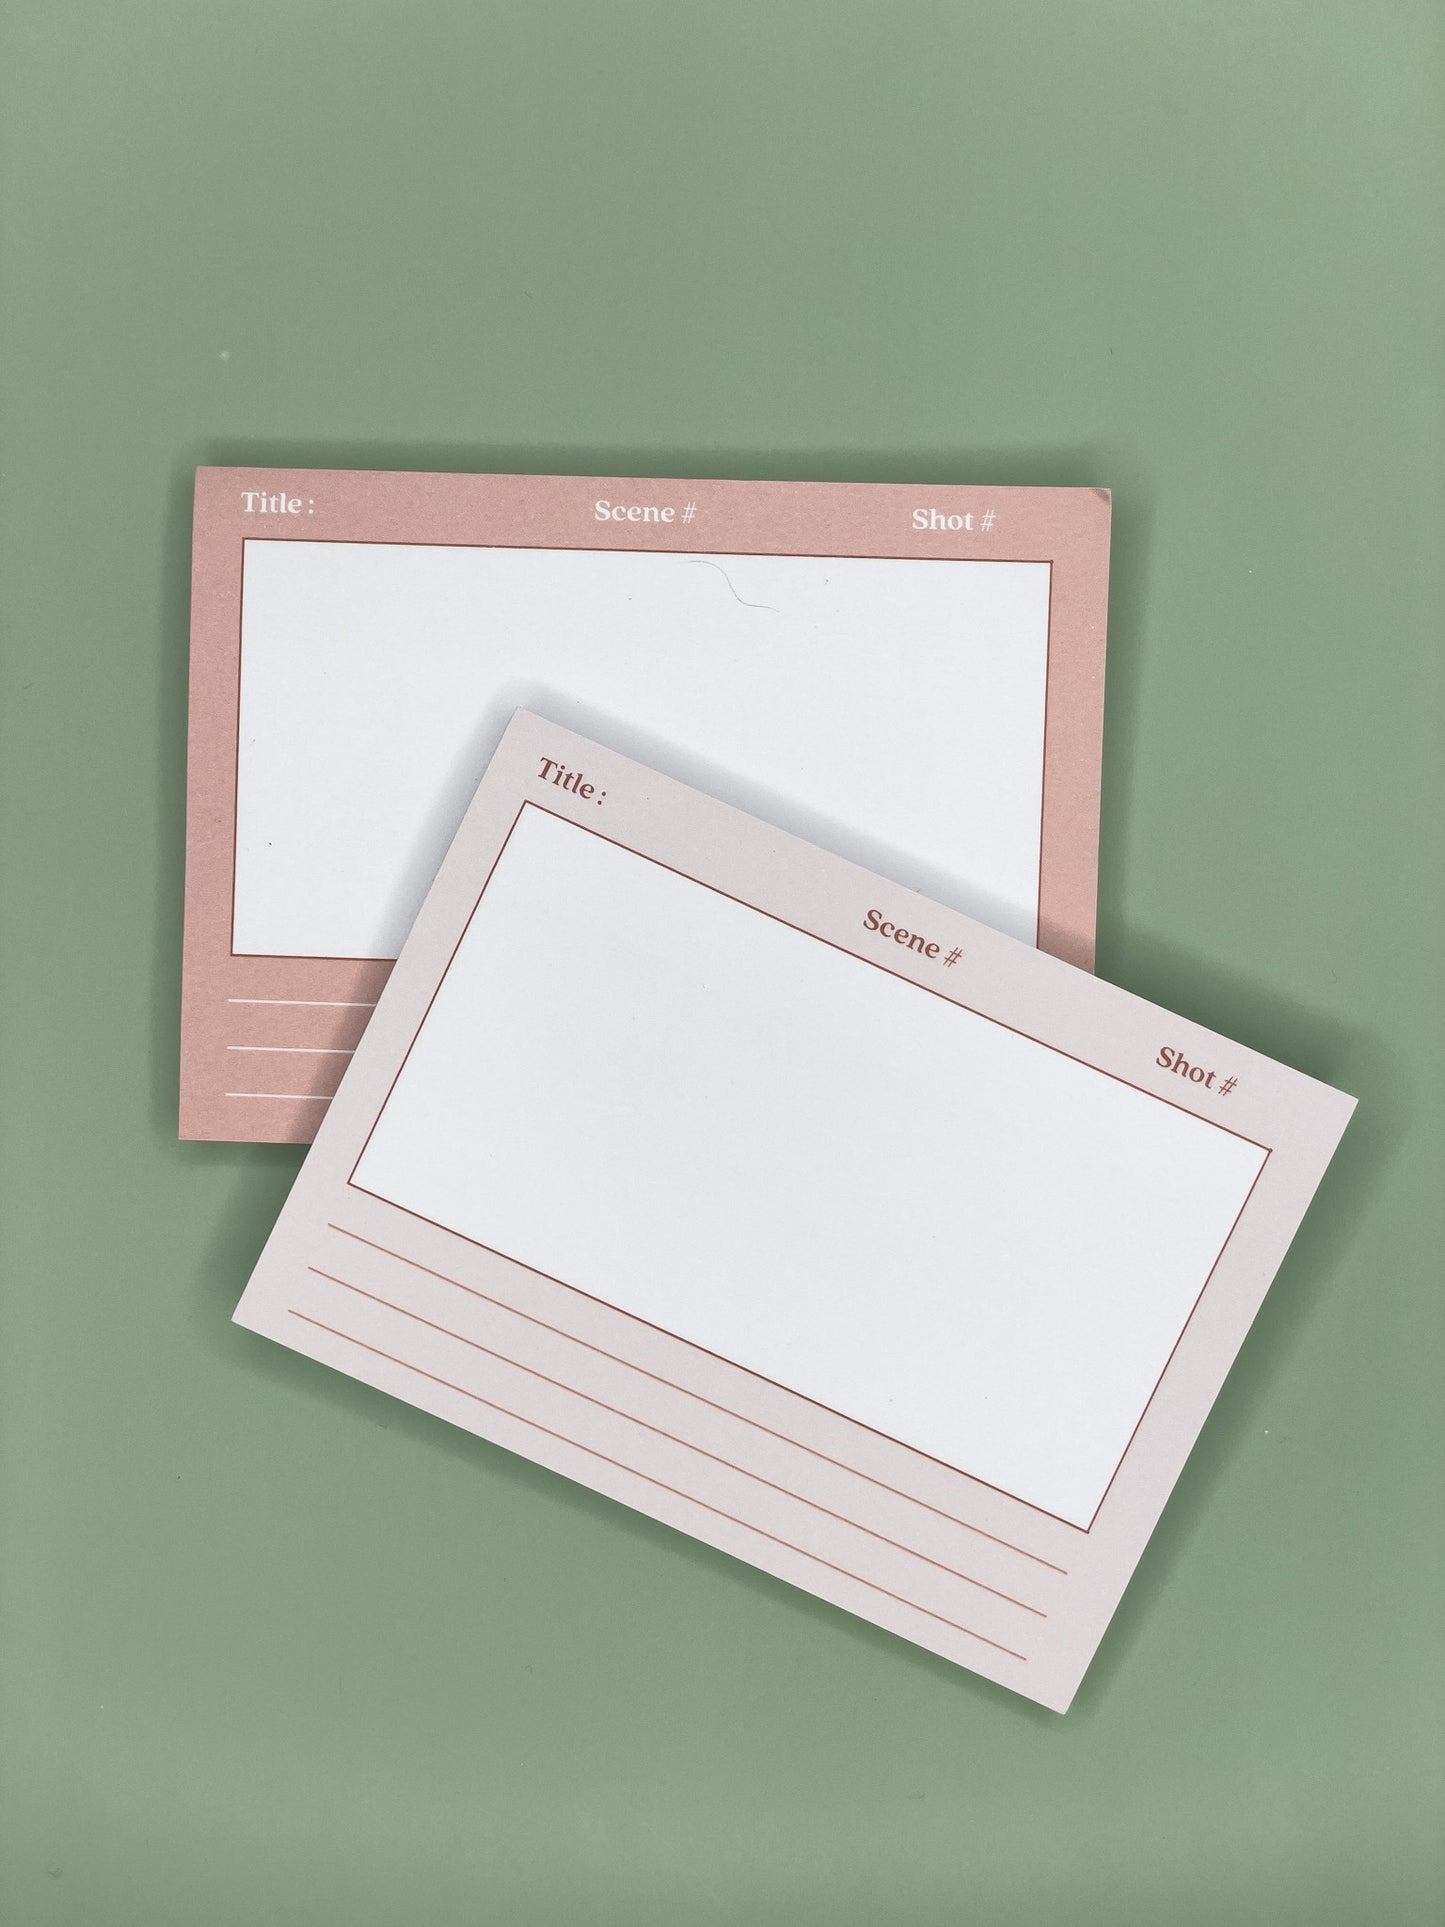 Art student's ultimate storyboard sticky note for bringing their creative ideas to life. High-quality paper and user-friendly layout perfect for sketching, visualizing shots and creating storyboards. Durable cover, compact size, and easy to take on the go